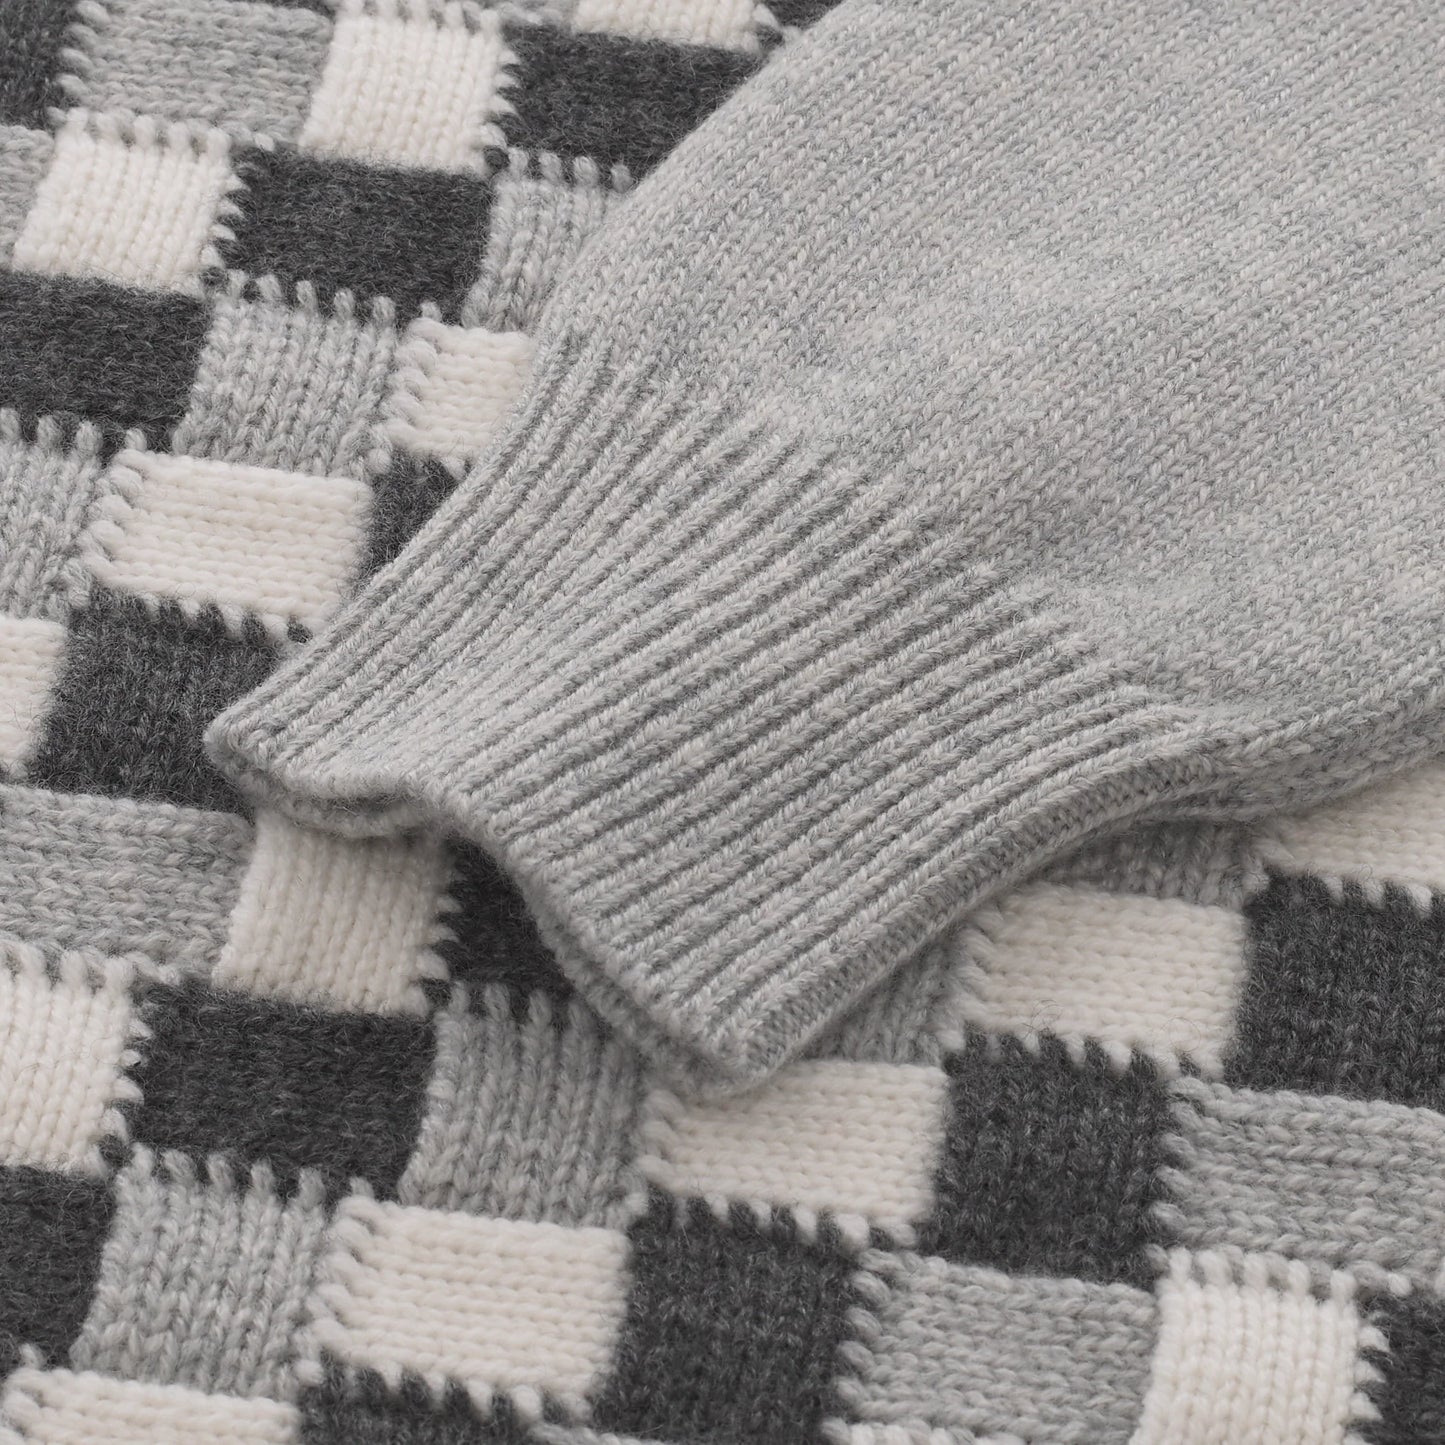 Cashmere Checked Sweater in Grey